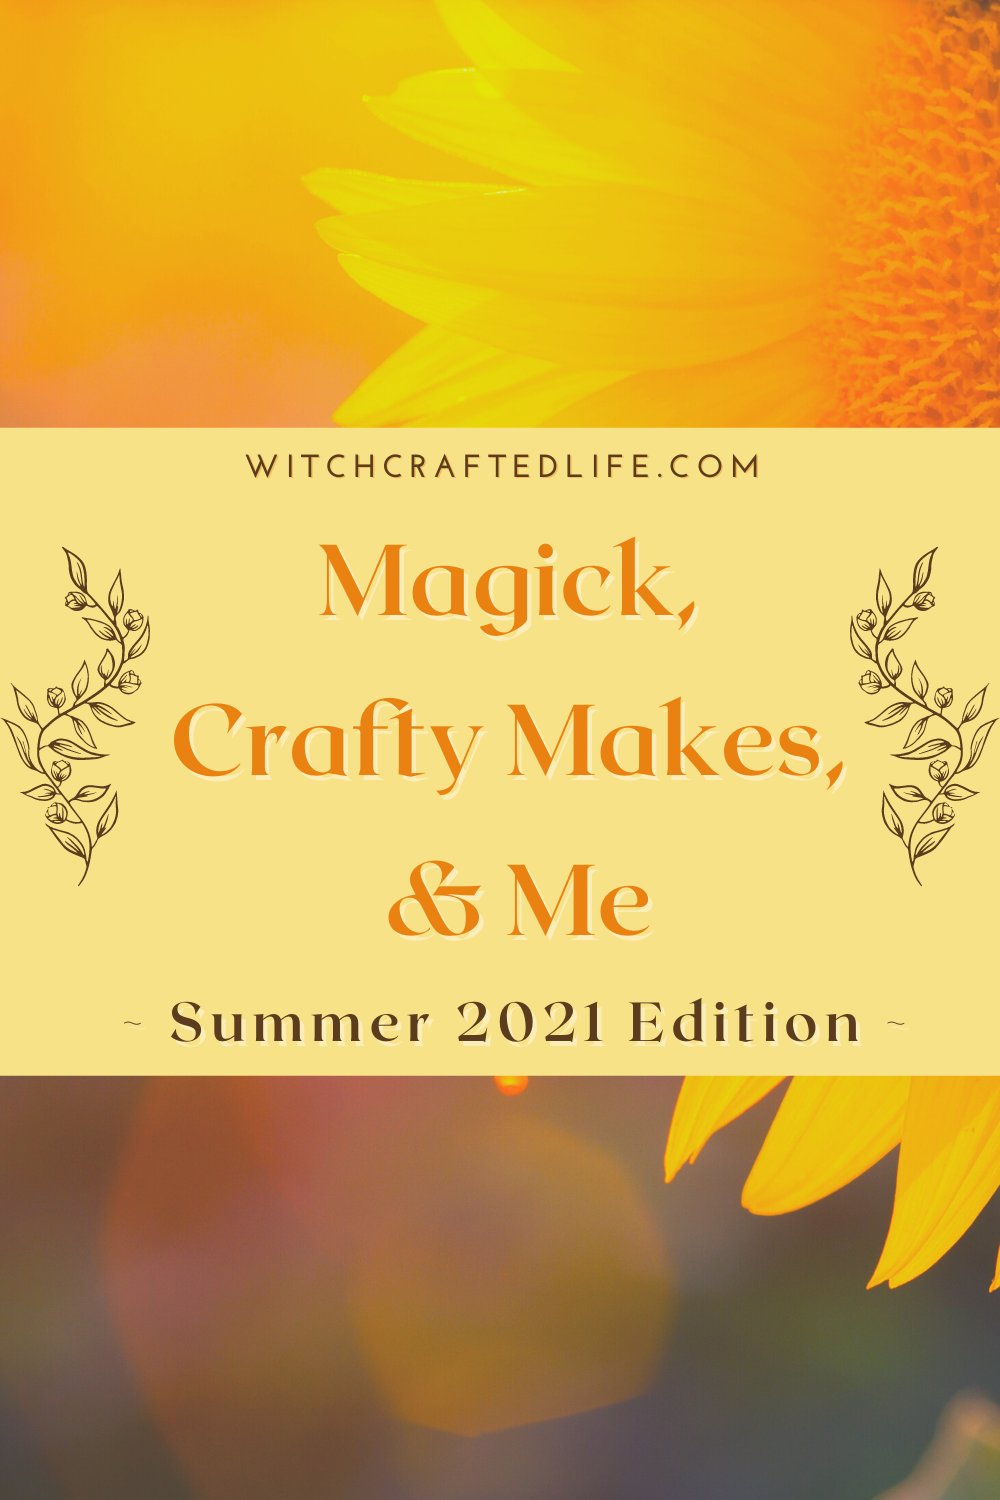 Summer 2021 Edition of Magick, Crafty Makes, and Me